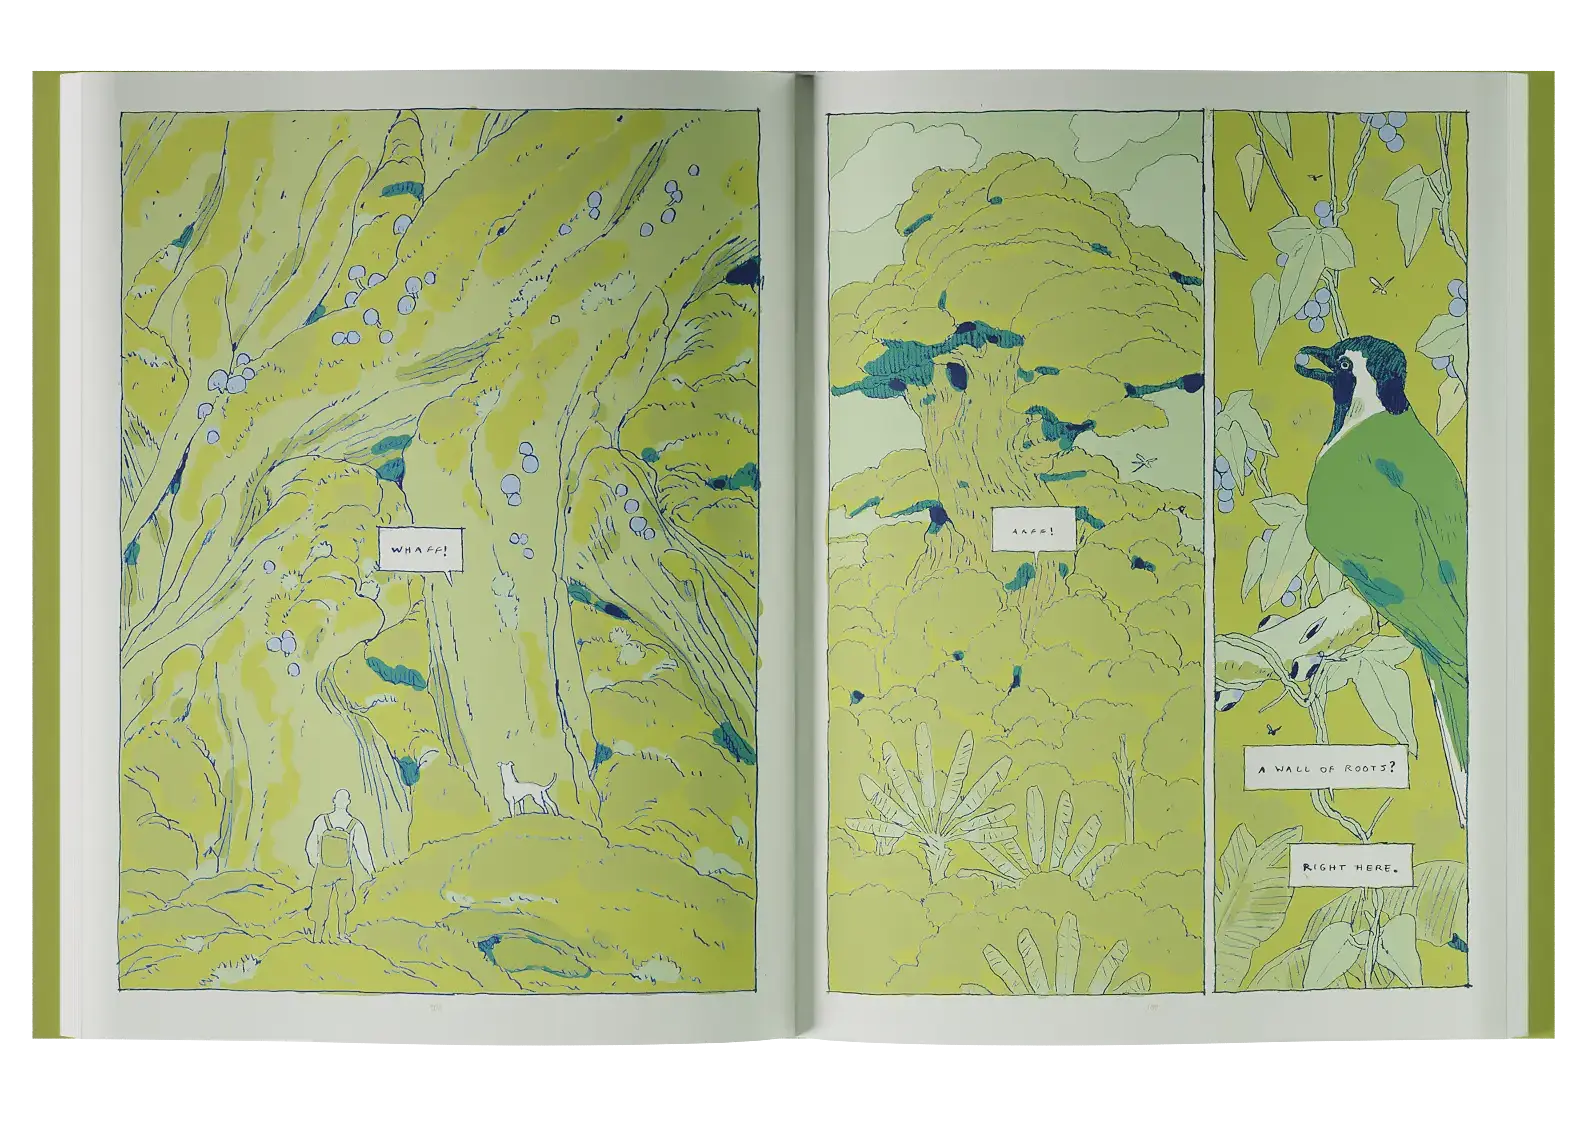 Spread from interiors of the book.